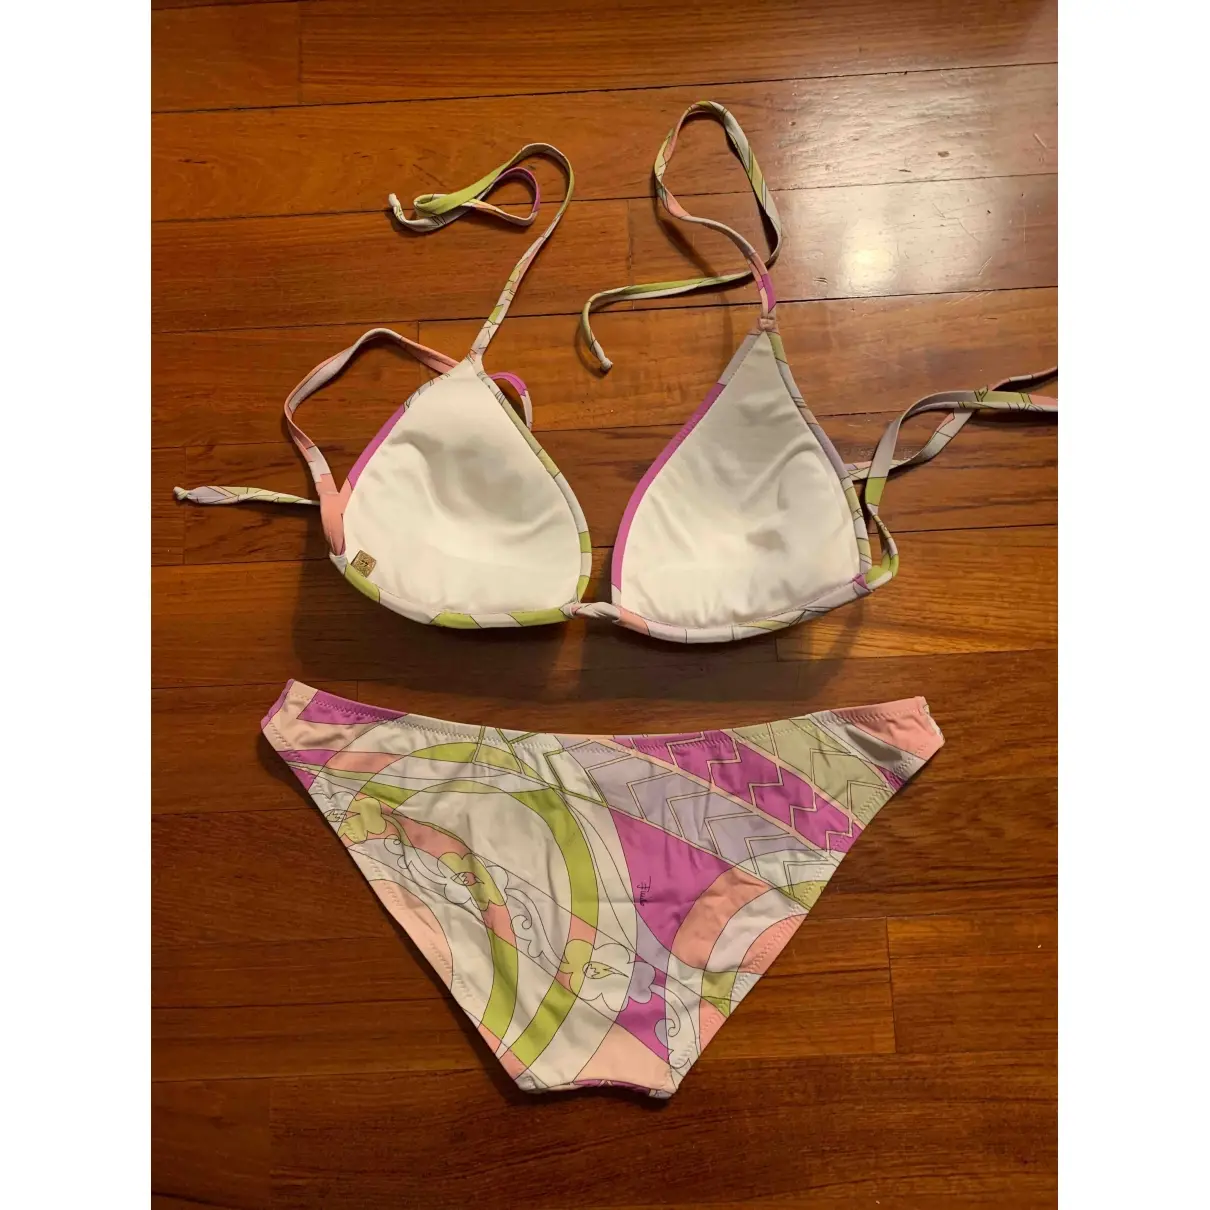 Emilio Pucci Two-piece swimsuit for sale